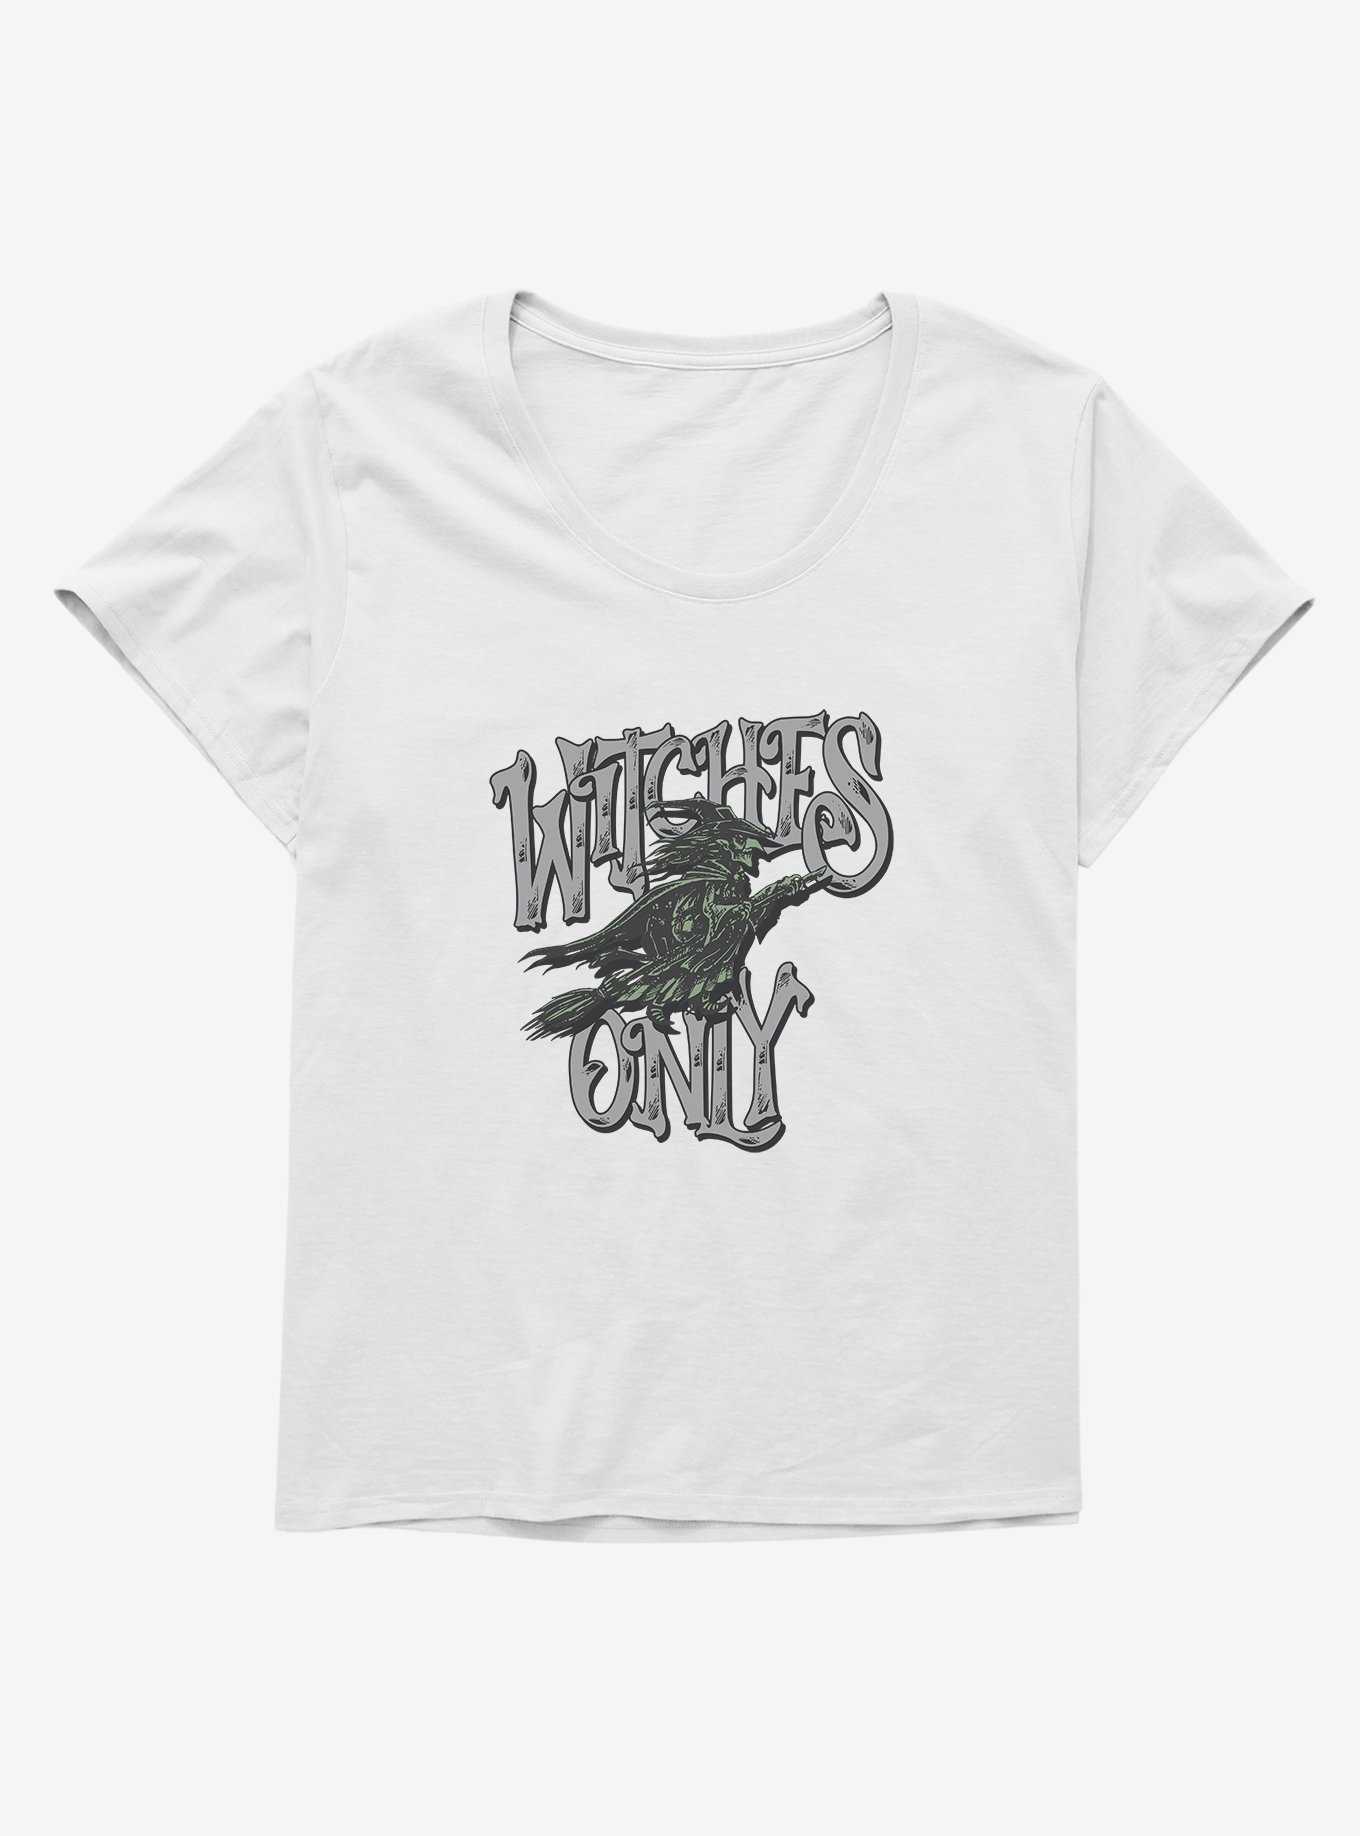 Withces Only Girls T-Shirt Plus Size, , hi-res